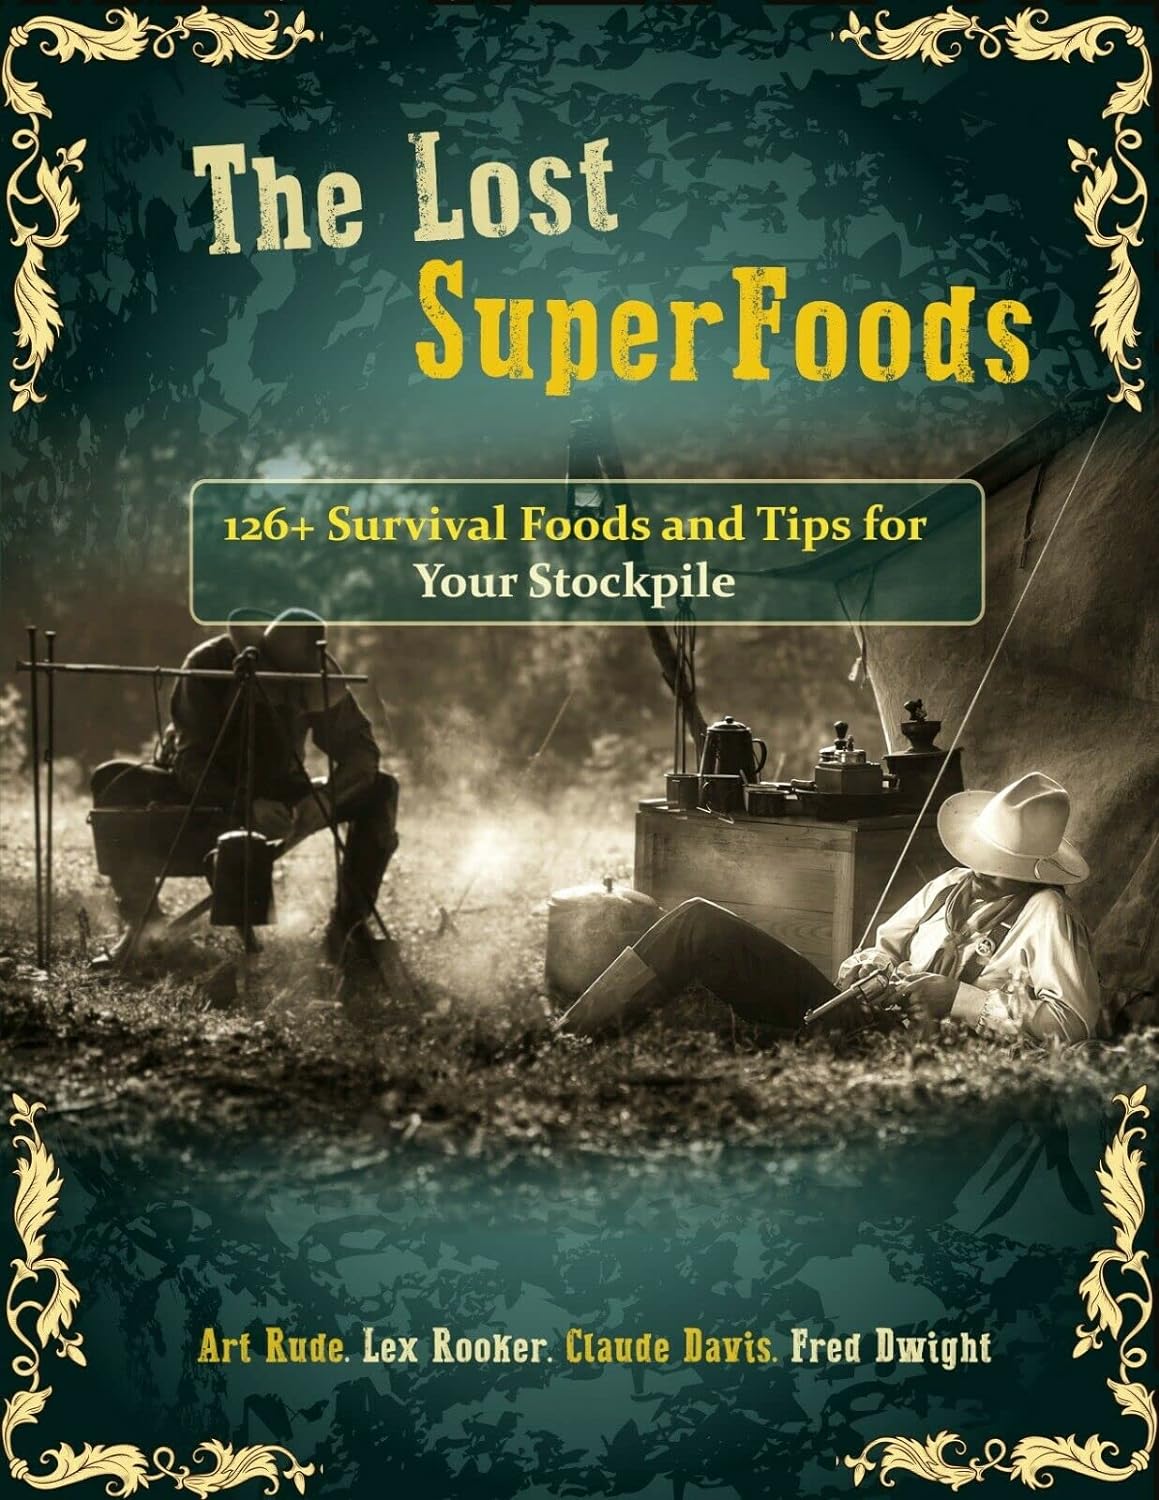 The Lost SuperFoods 126+ Survival Foods and Tips for Your Stockpile - Paperback